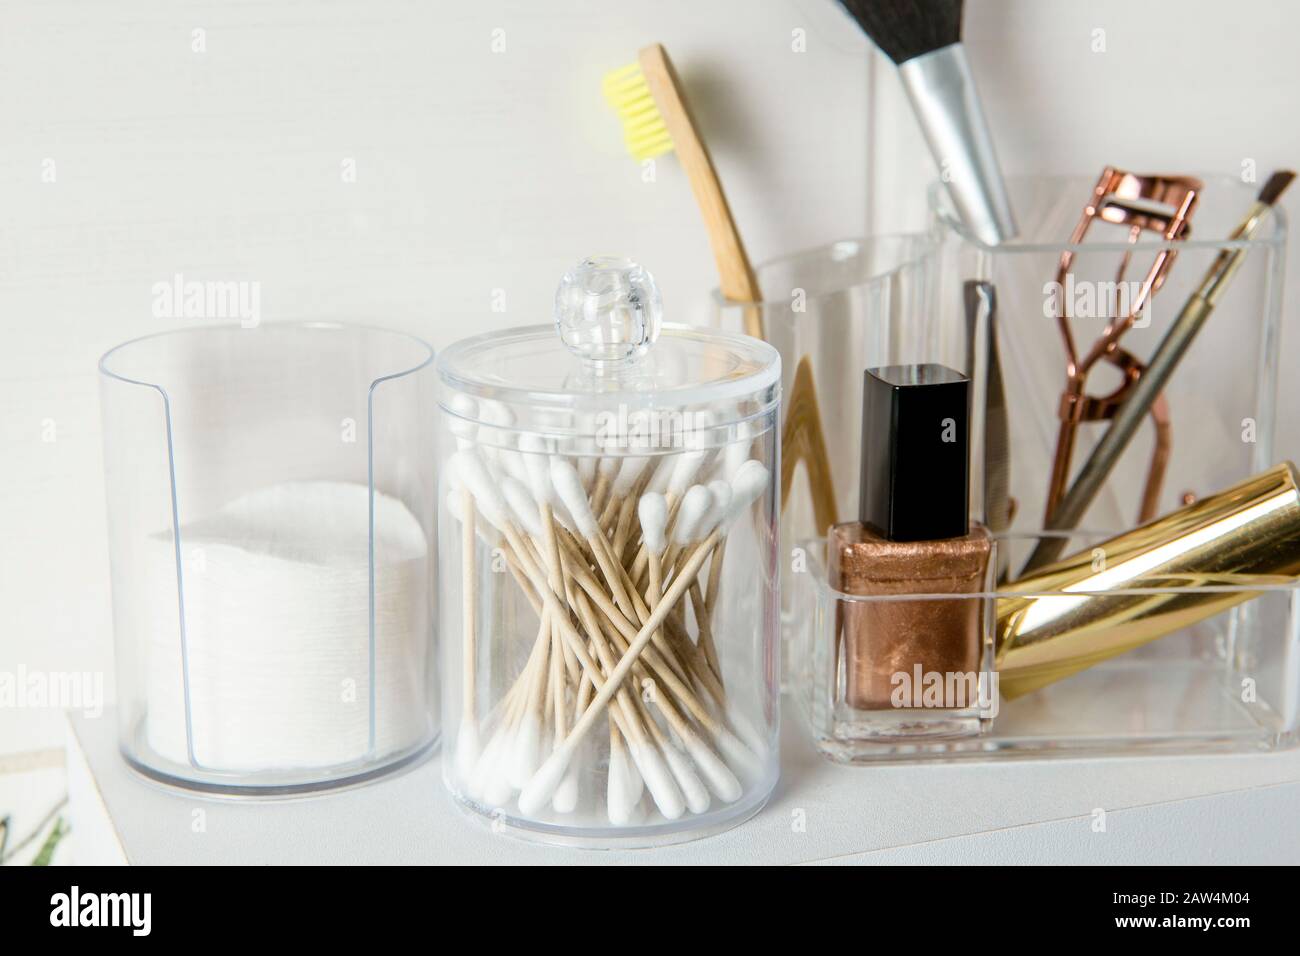 Make up products organizing concept. Beauty products in organizer container box on tidy way on minimalist shelf. Cotton pads stacked, Q-tips. Stock Photo